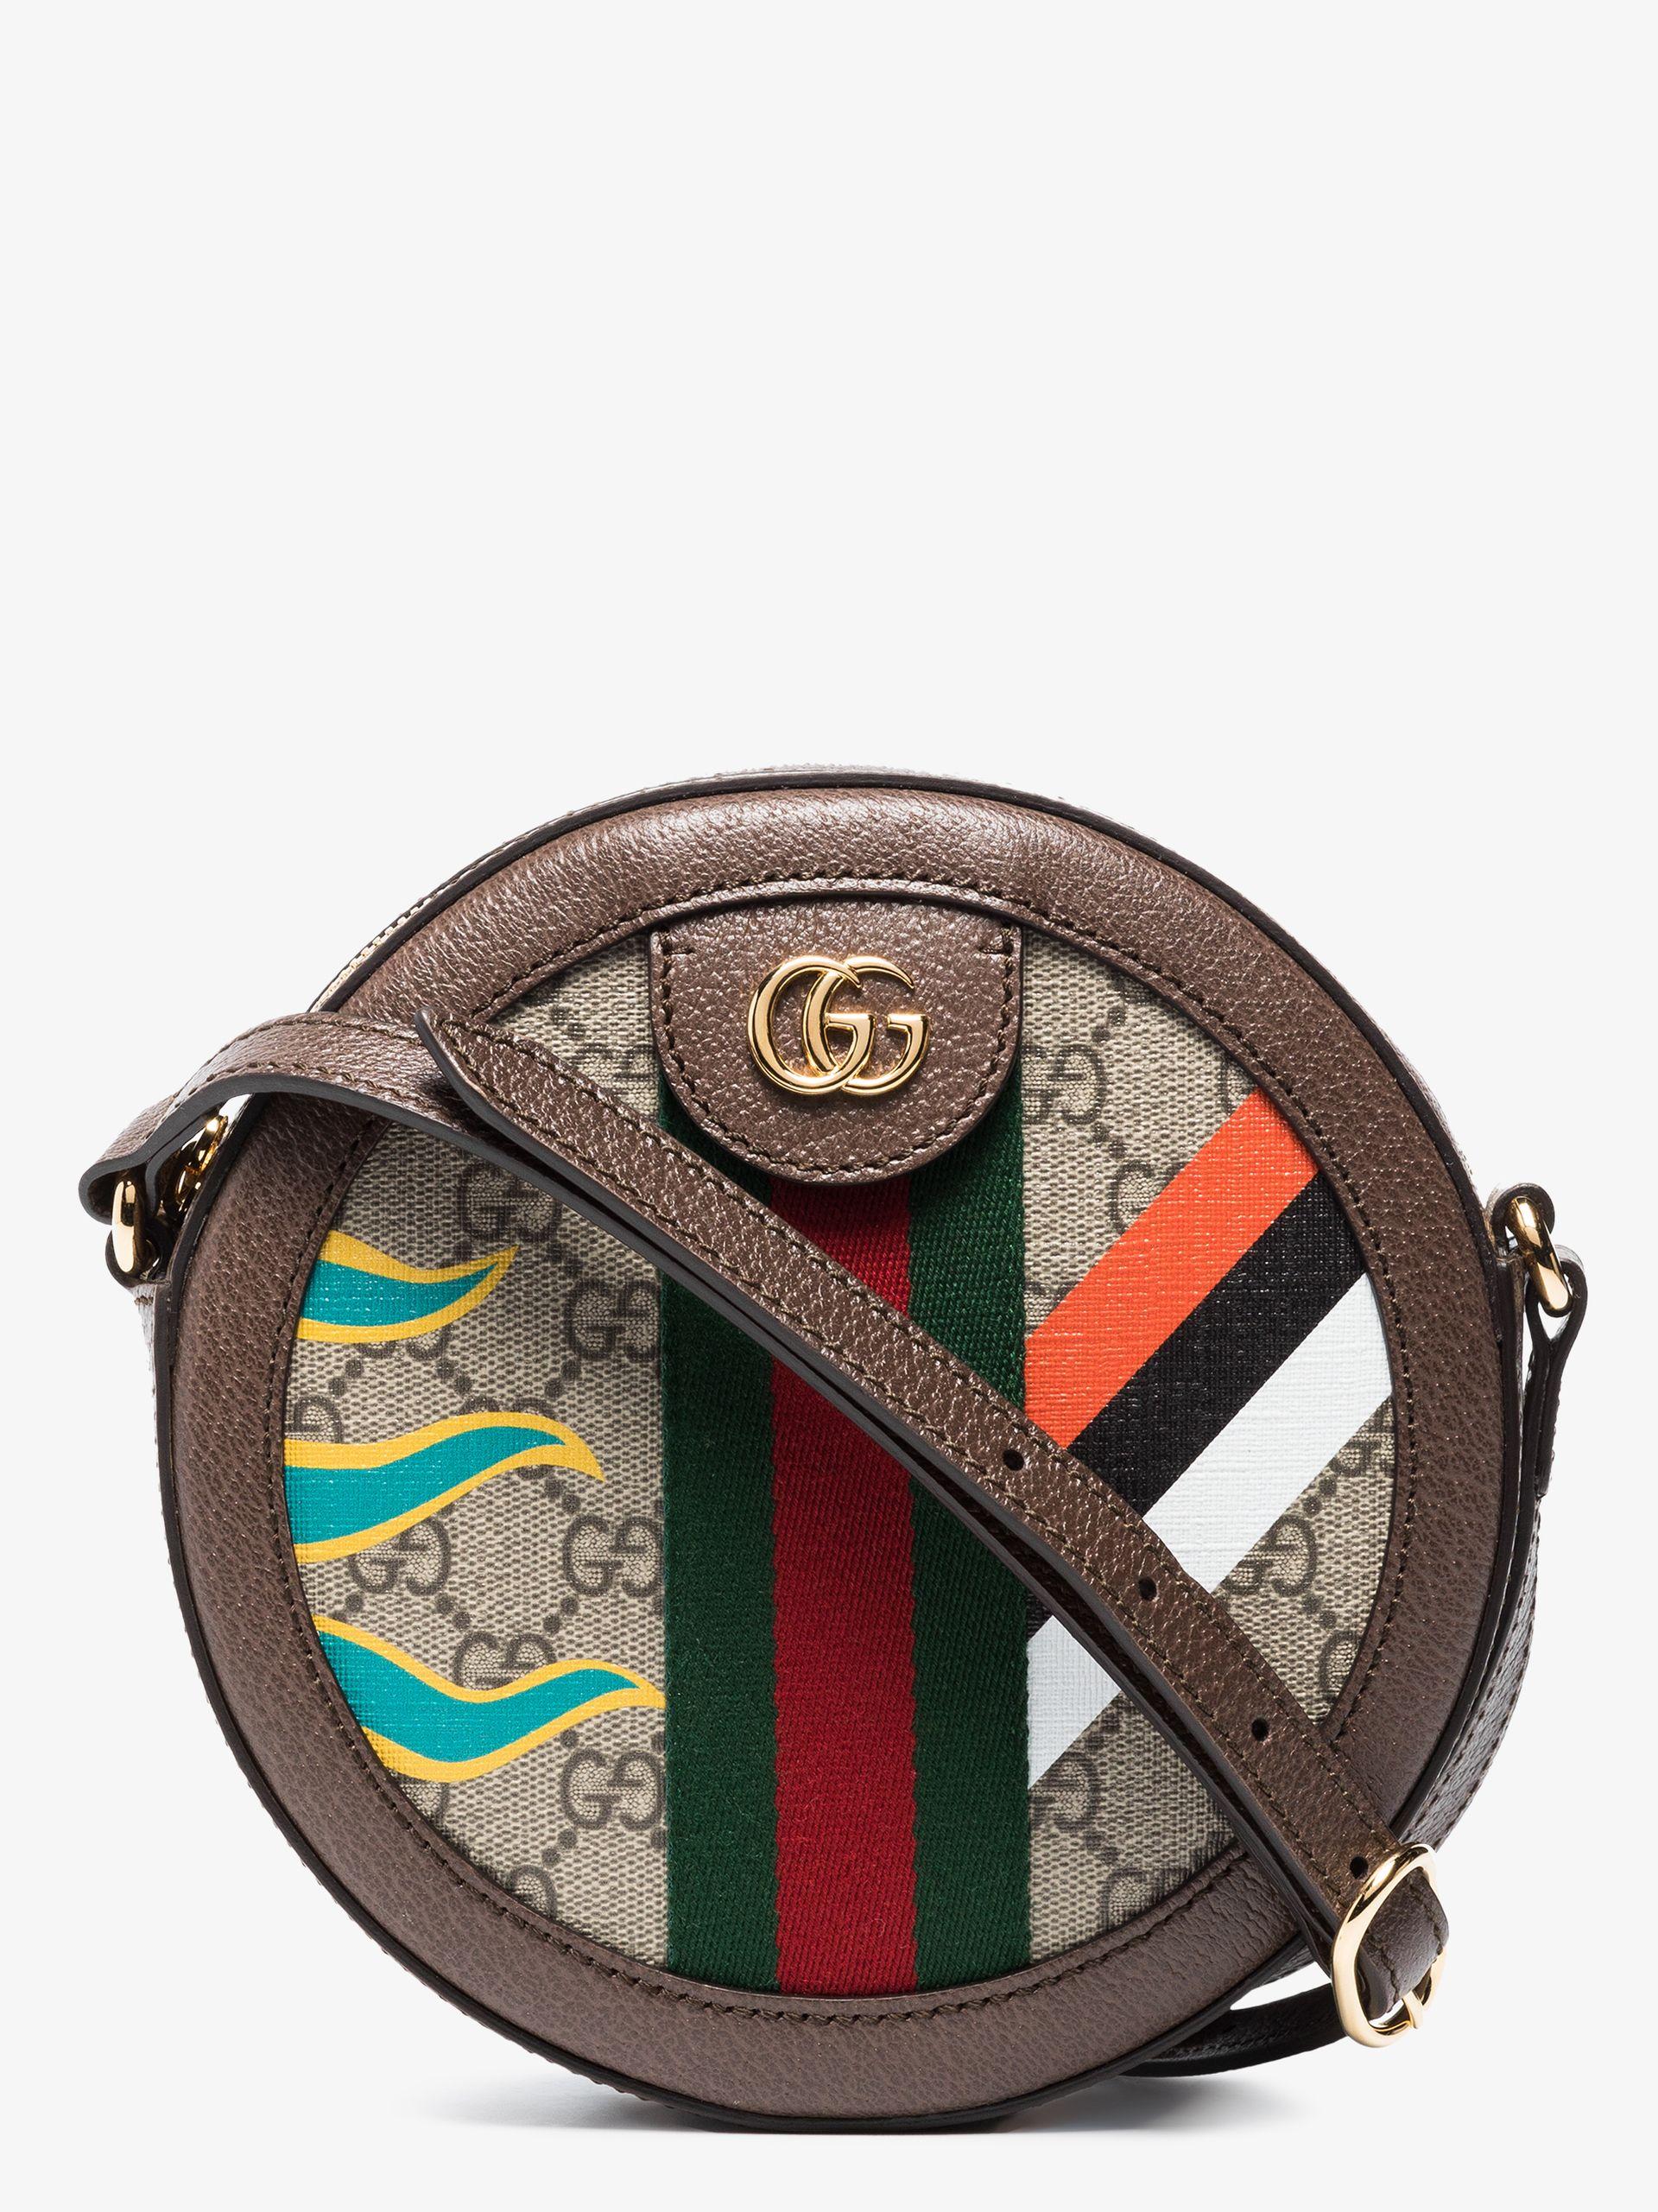 Gucci Horse Racing Round Cross Body Bag in Brown | Lyst